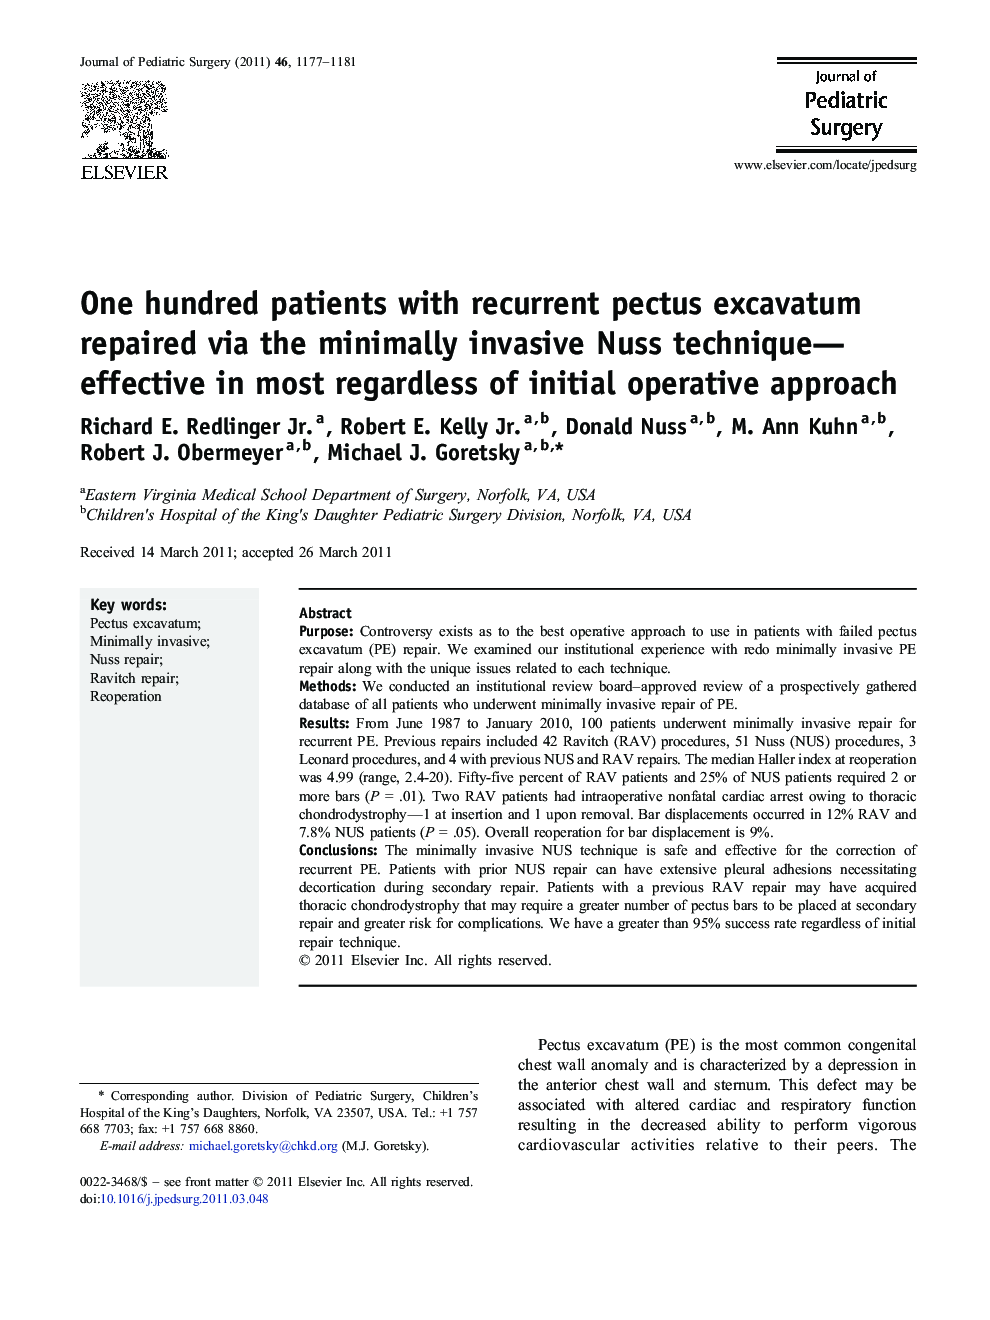 One hundred patients with recurrent pectus excavatum repaired via the minimally invasive Nuss technique—effective in most regardless of initial operative approach